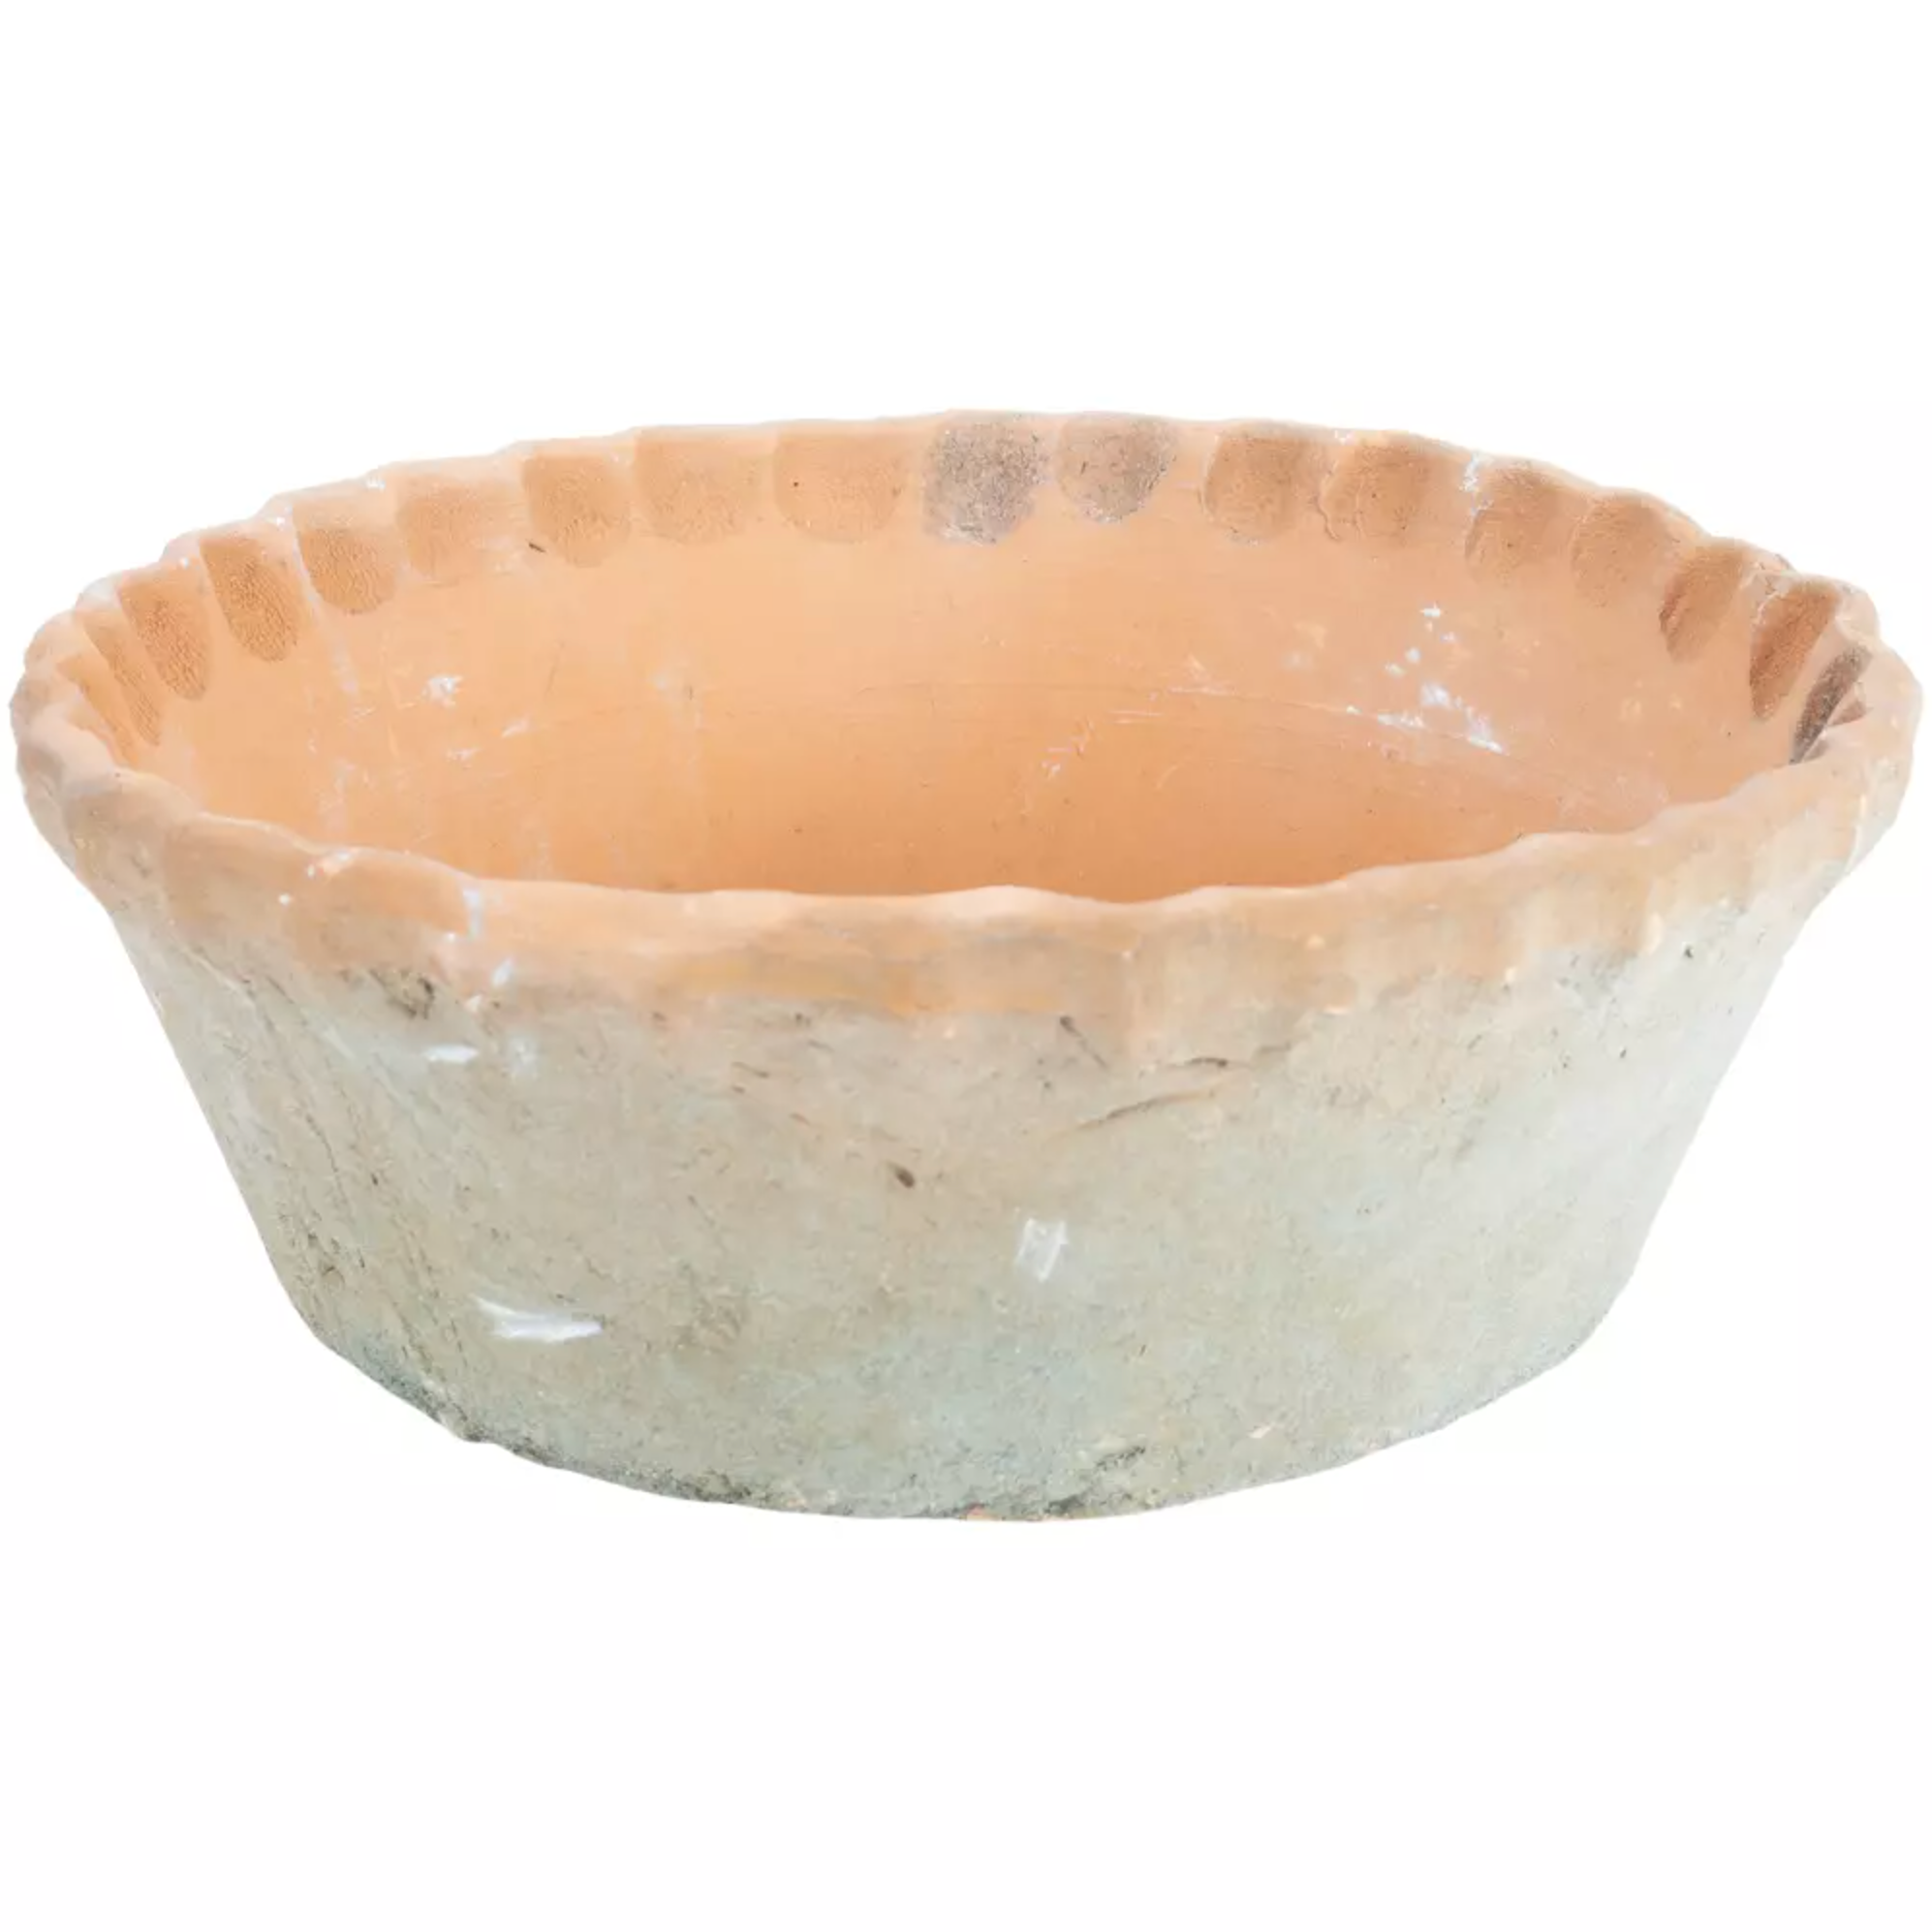 Small Terracotta Planter with a Pie Crust Rim 